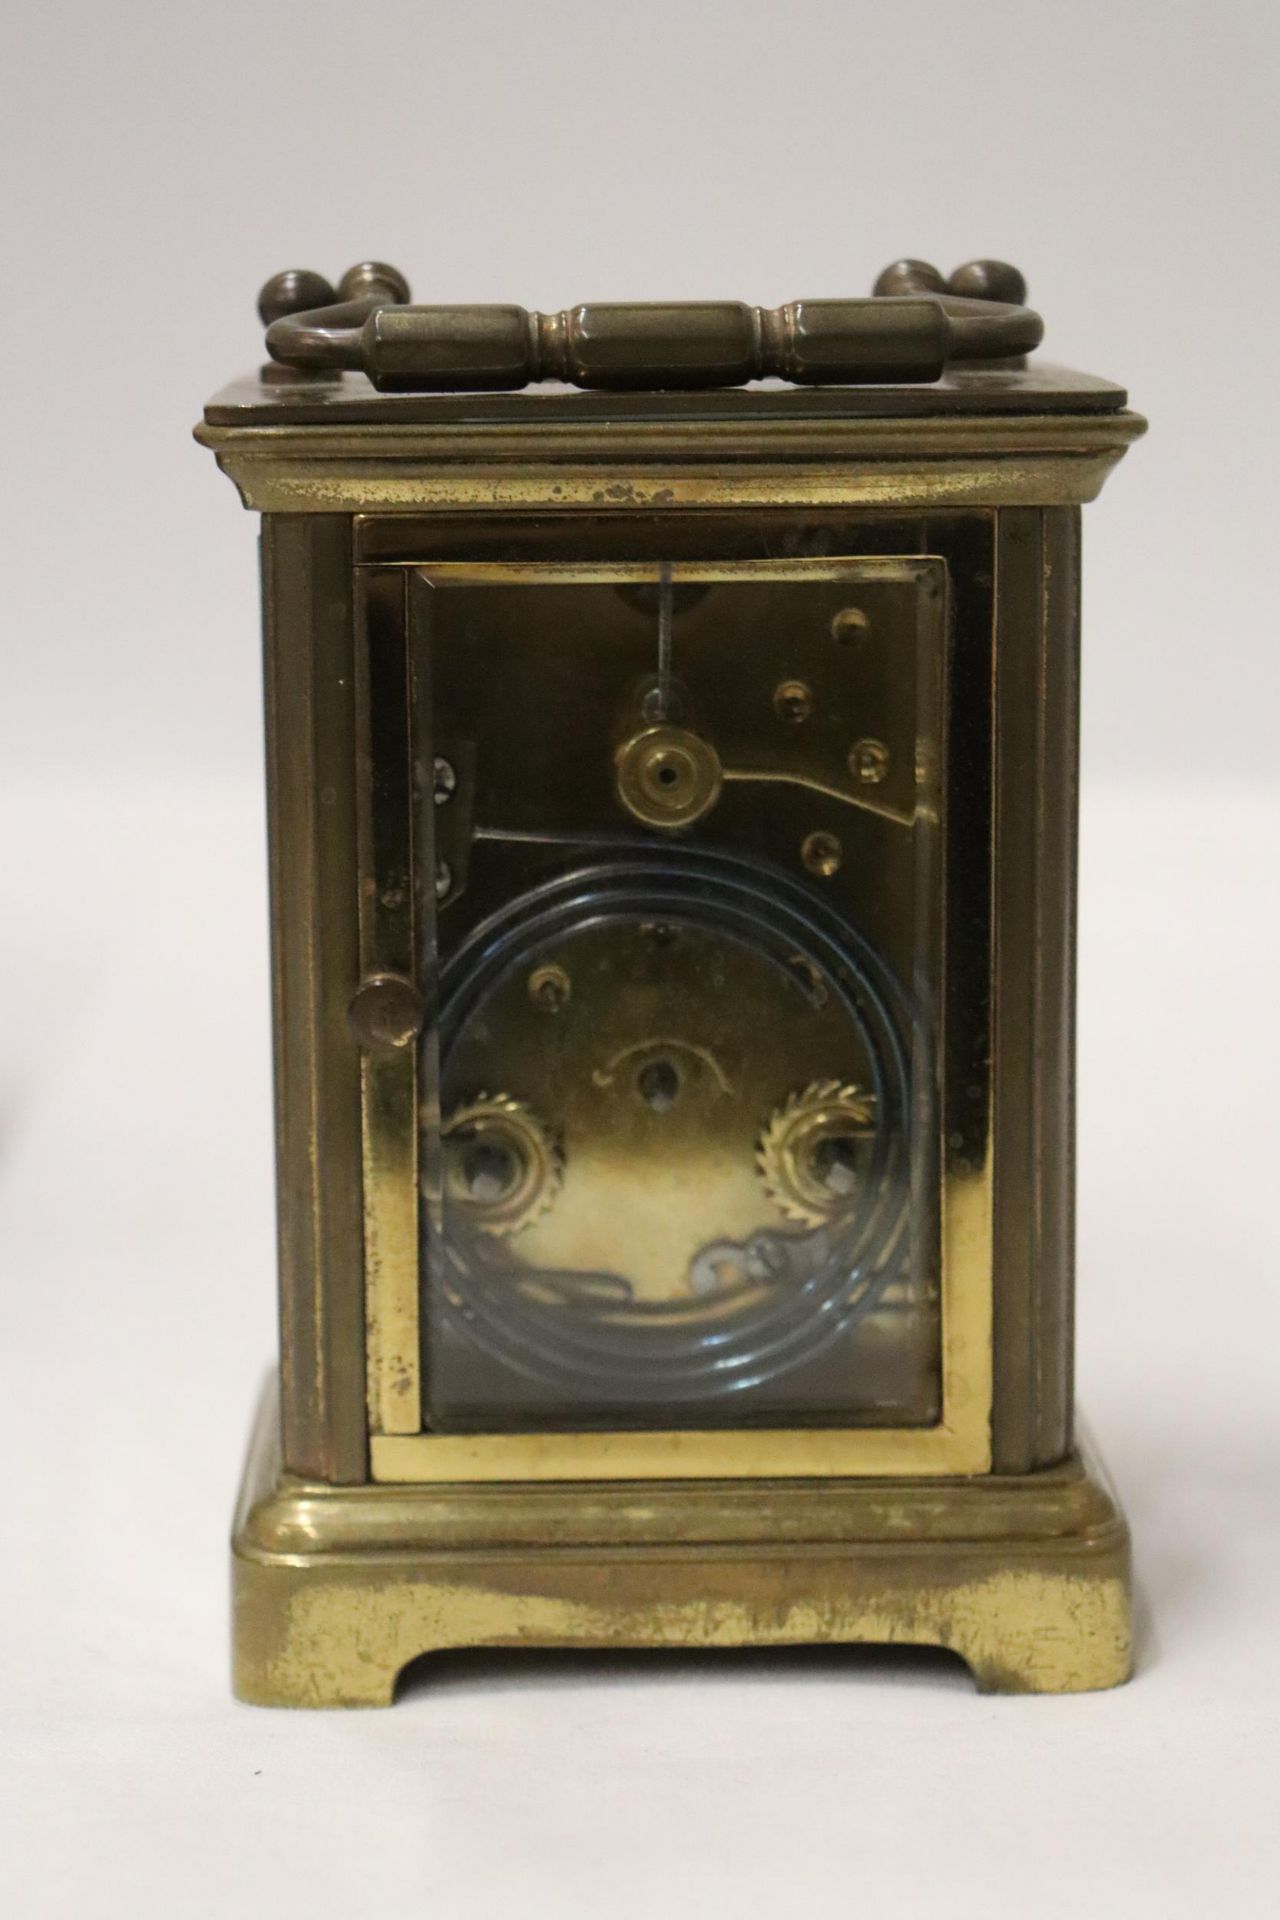 A VINTAGE BRASS ALARM CLOCK WITH GLASS SIDES TO SHOW INNER WORKINGS, IN A LEATHER CASE - Bild 6 aus 11